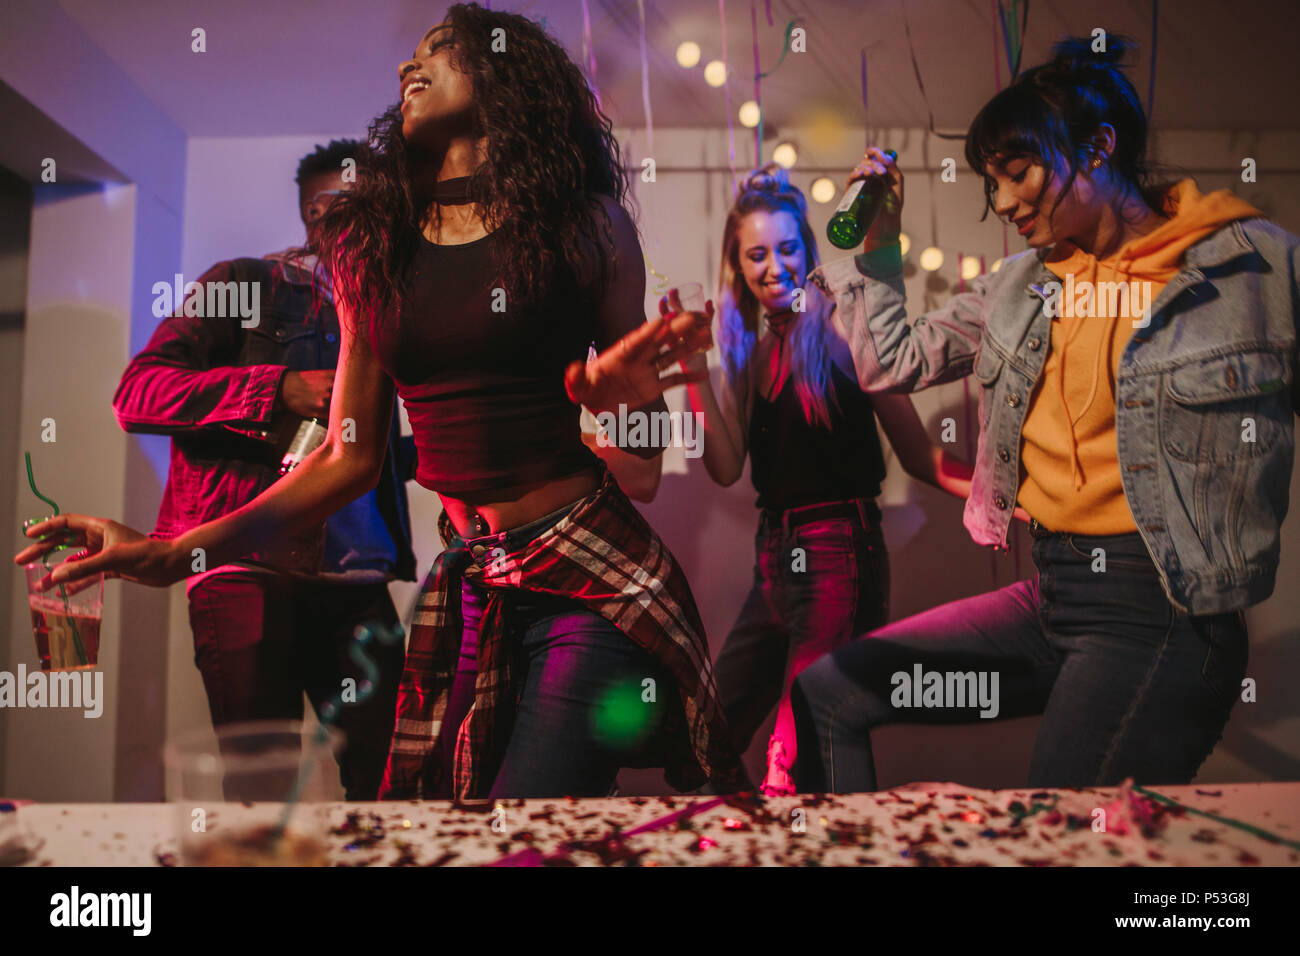 Friends dancing holding drinks at house party. Young women enjoying and having fun at the house party. Stock Photo